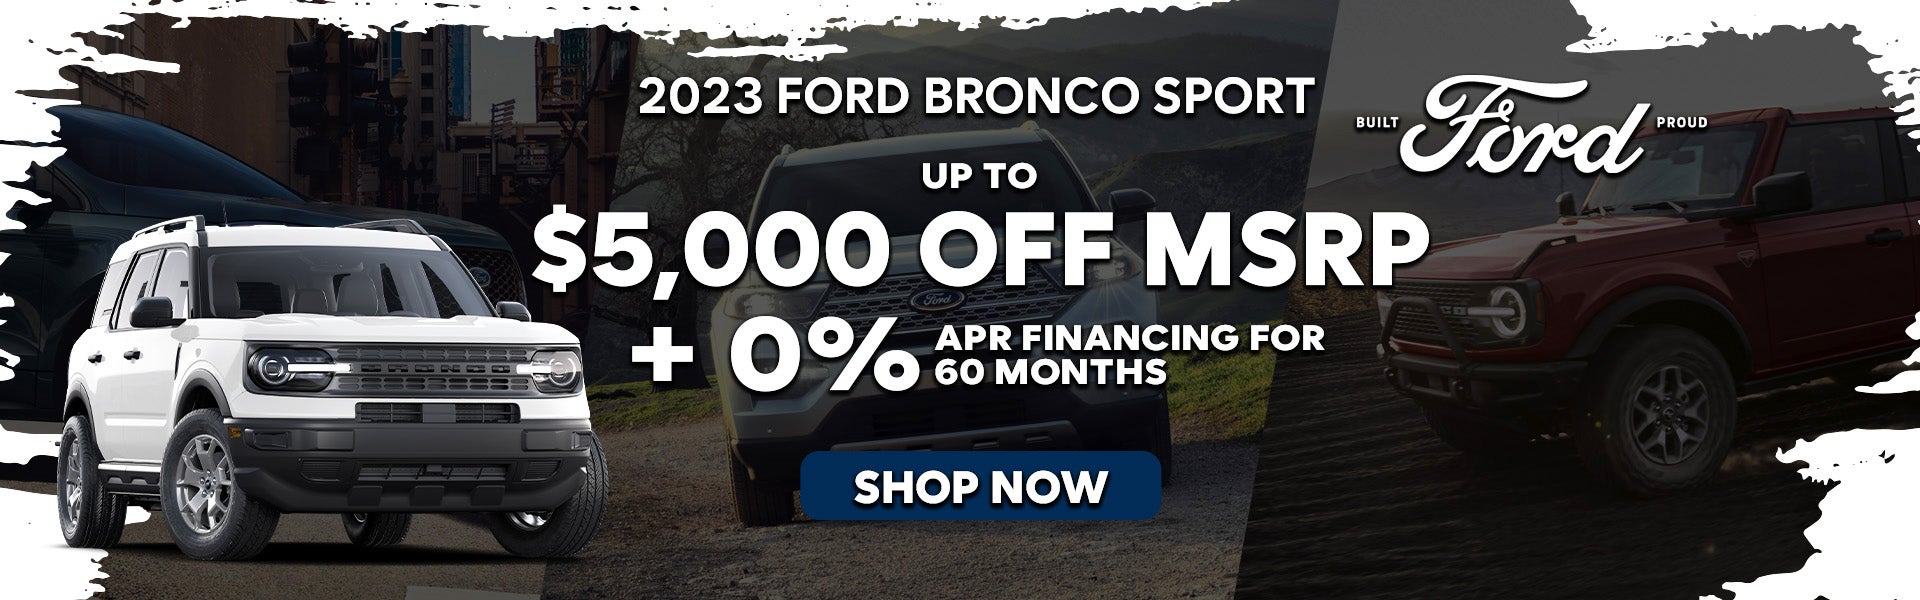 2023 Ford Bronco Sport Special Offer